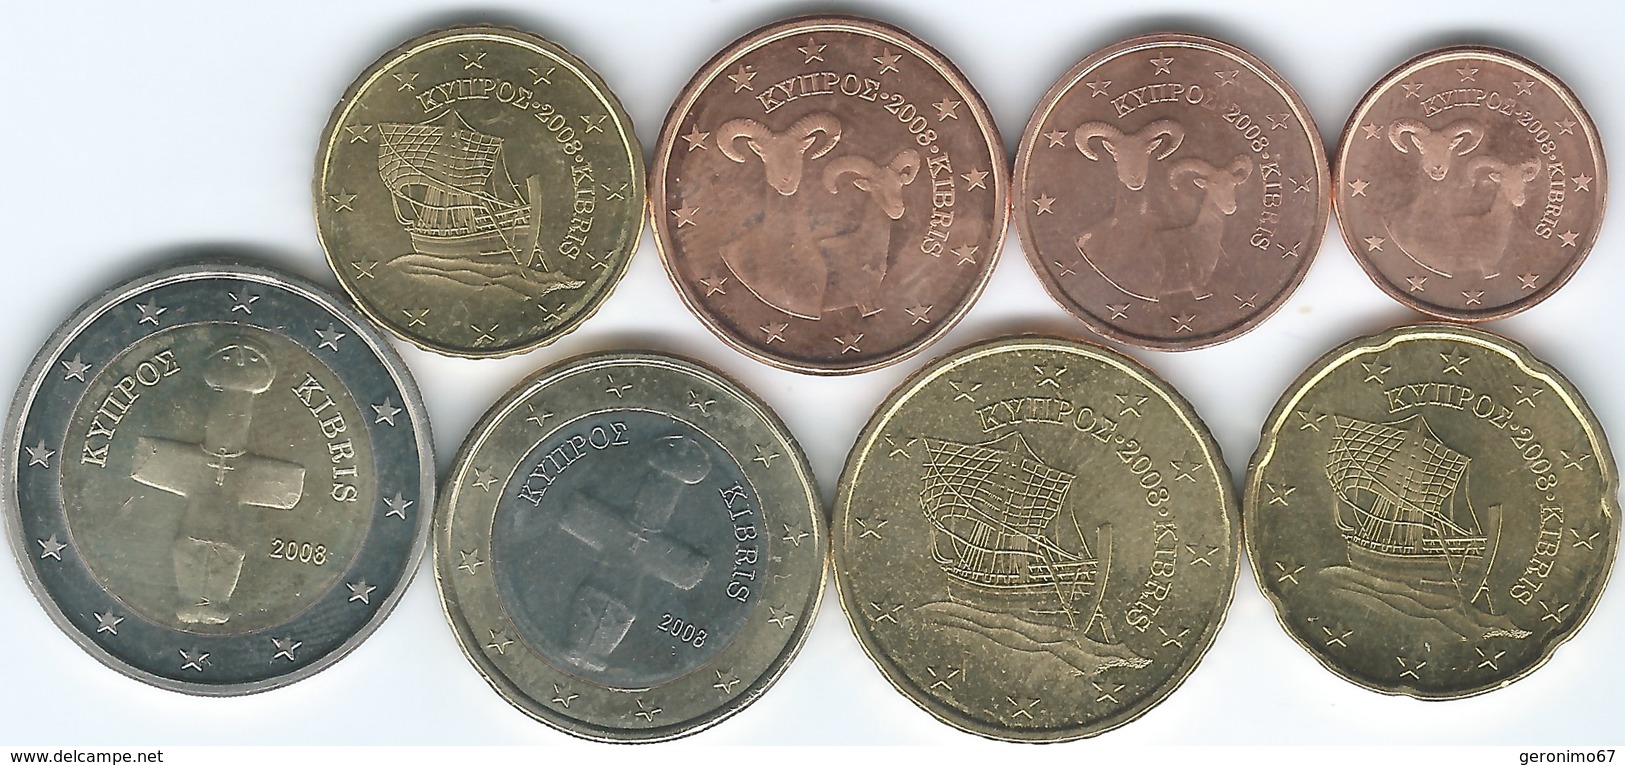 Cyprus - 2008 - 1, 2, 5, 10, 20 & 50 Cents; 1 & 2 Euro (KMs 78-85) UNC - Zypern